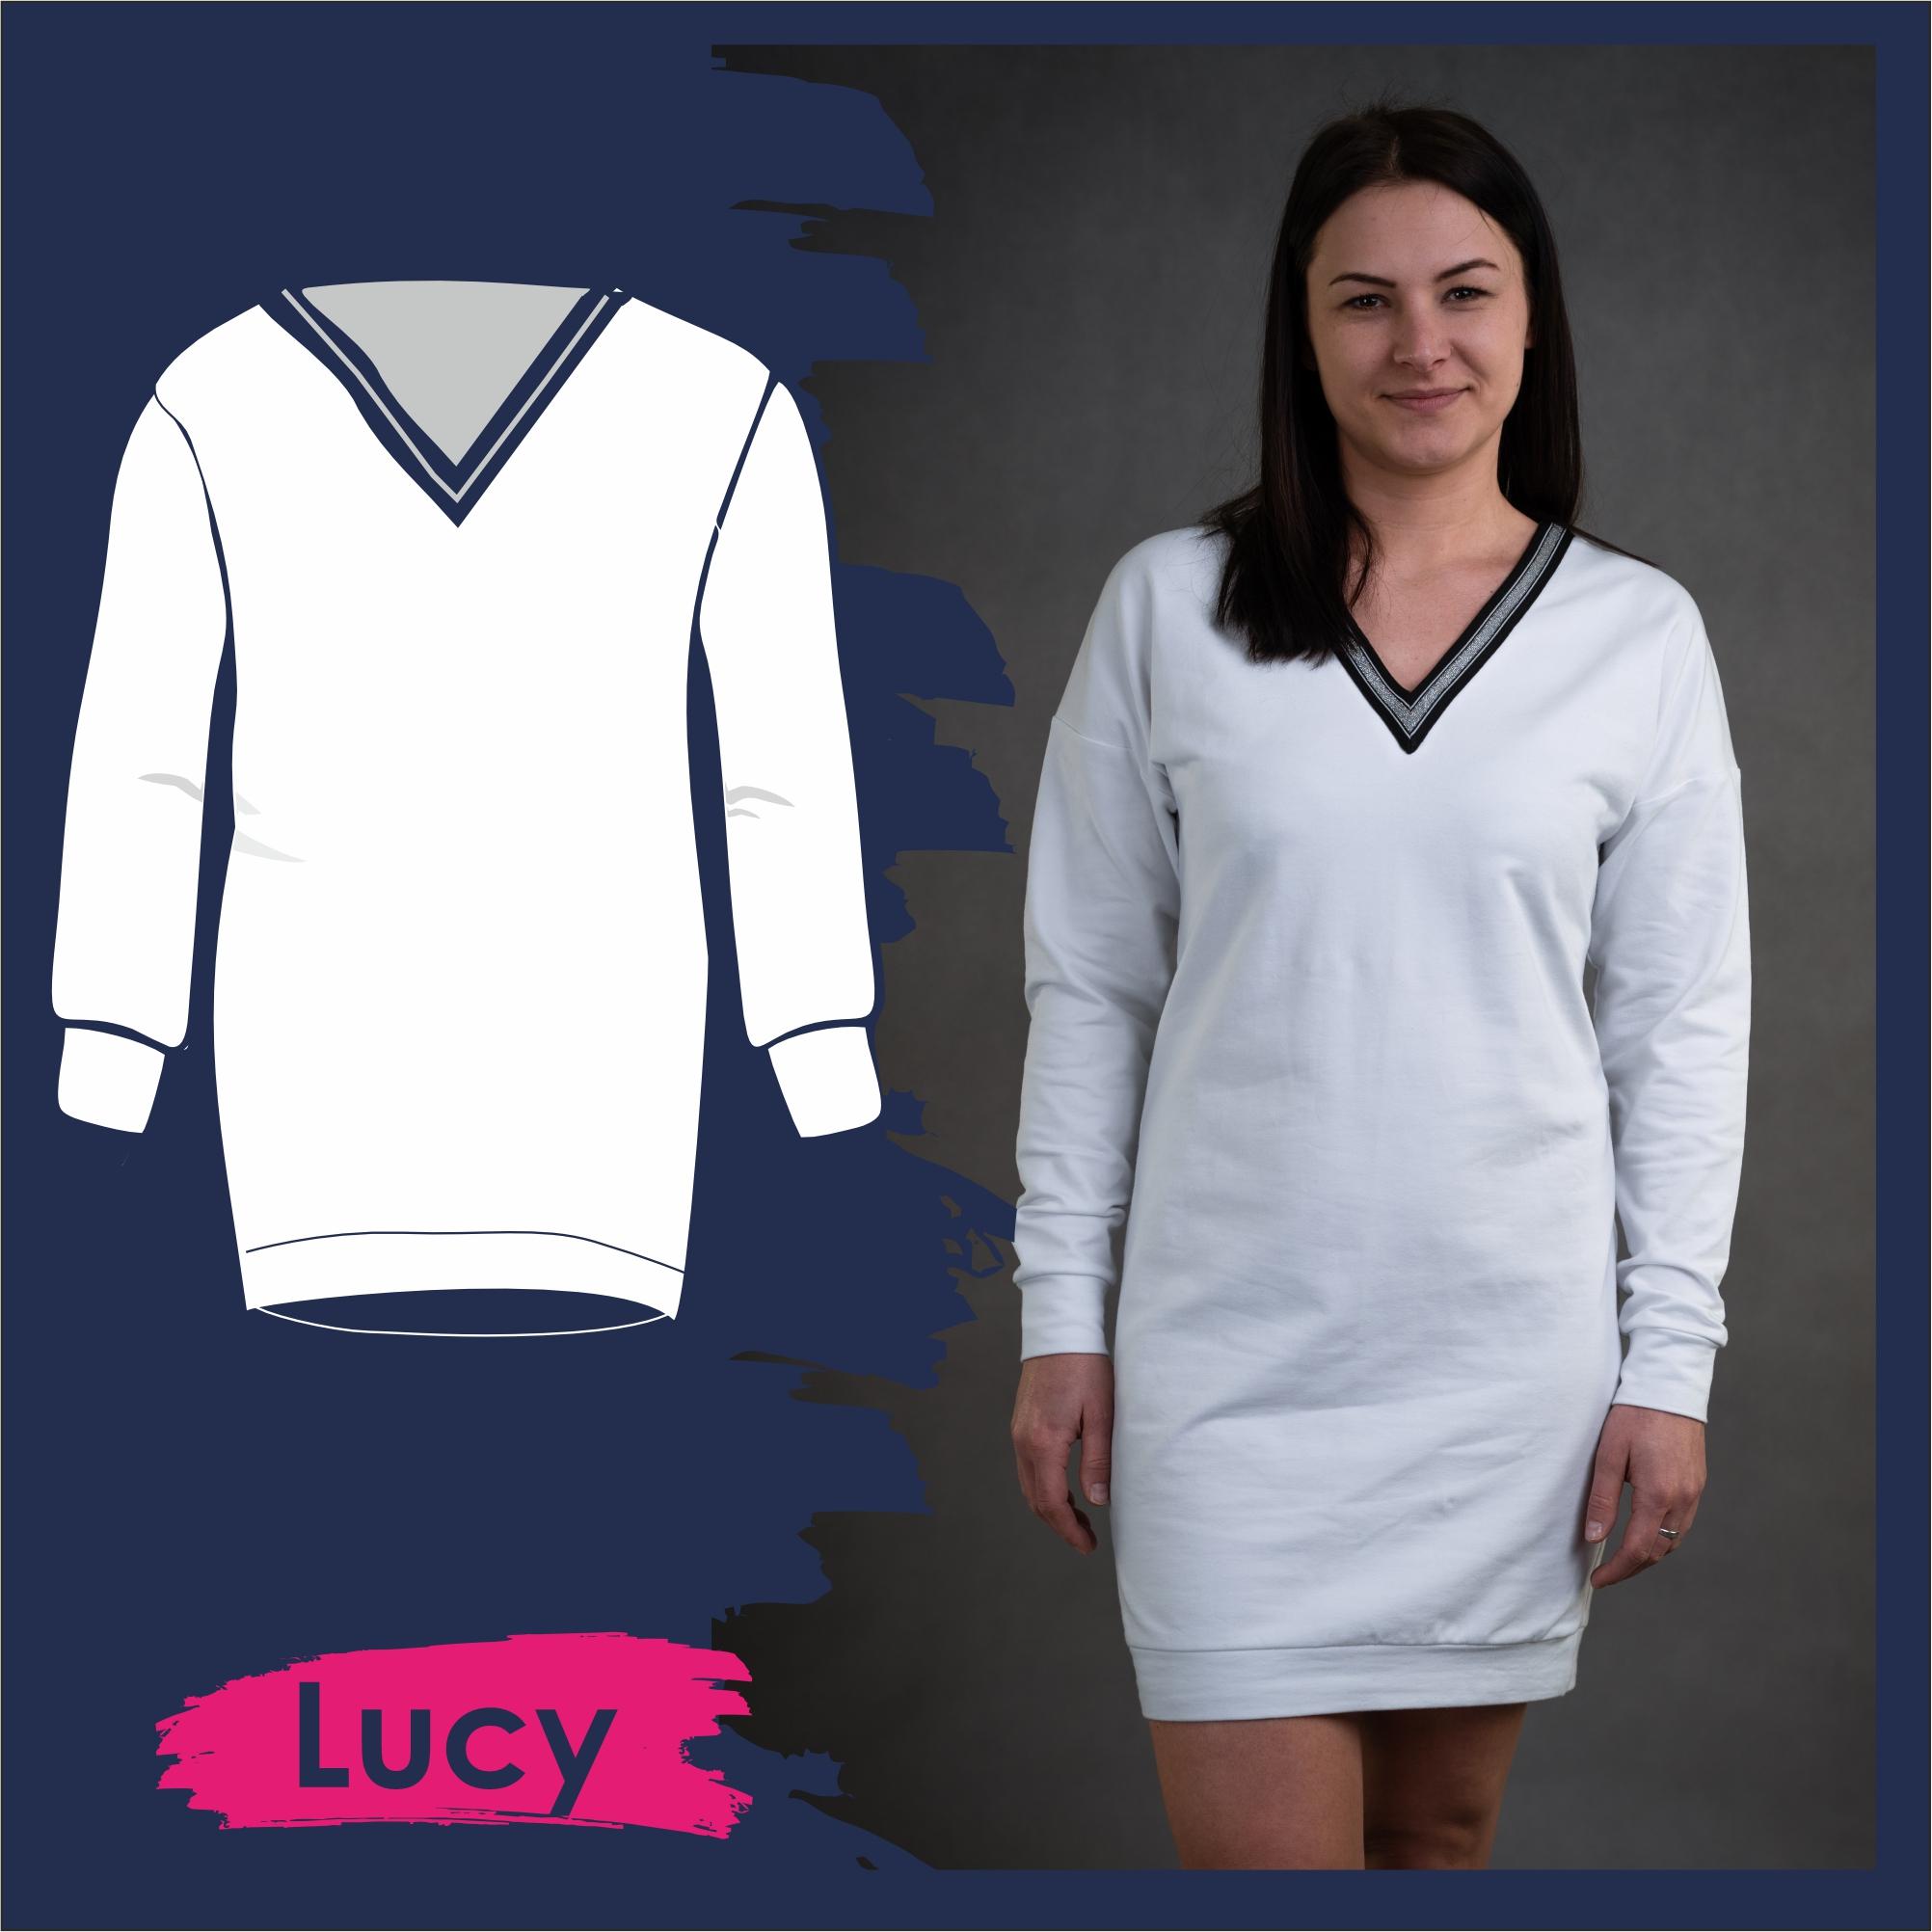 Tunic (LUCY)